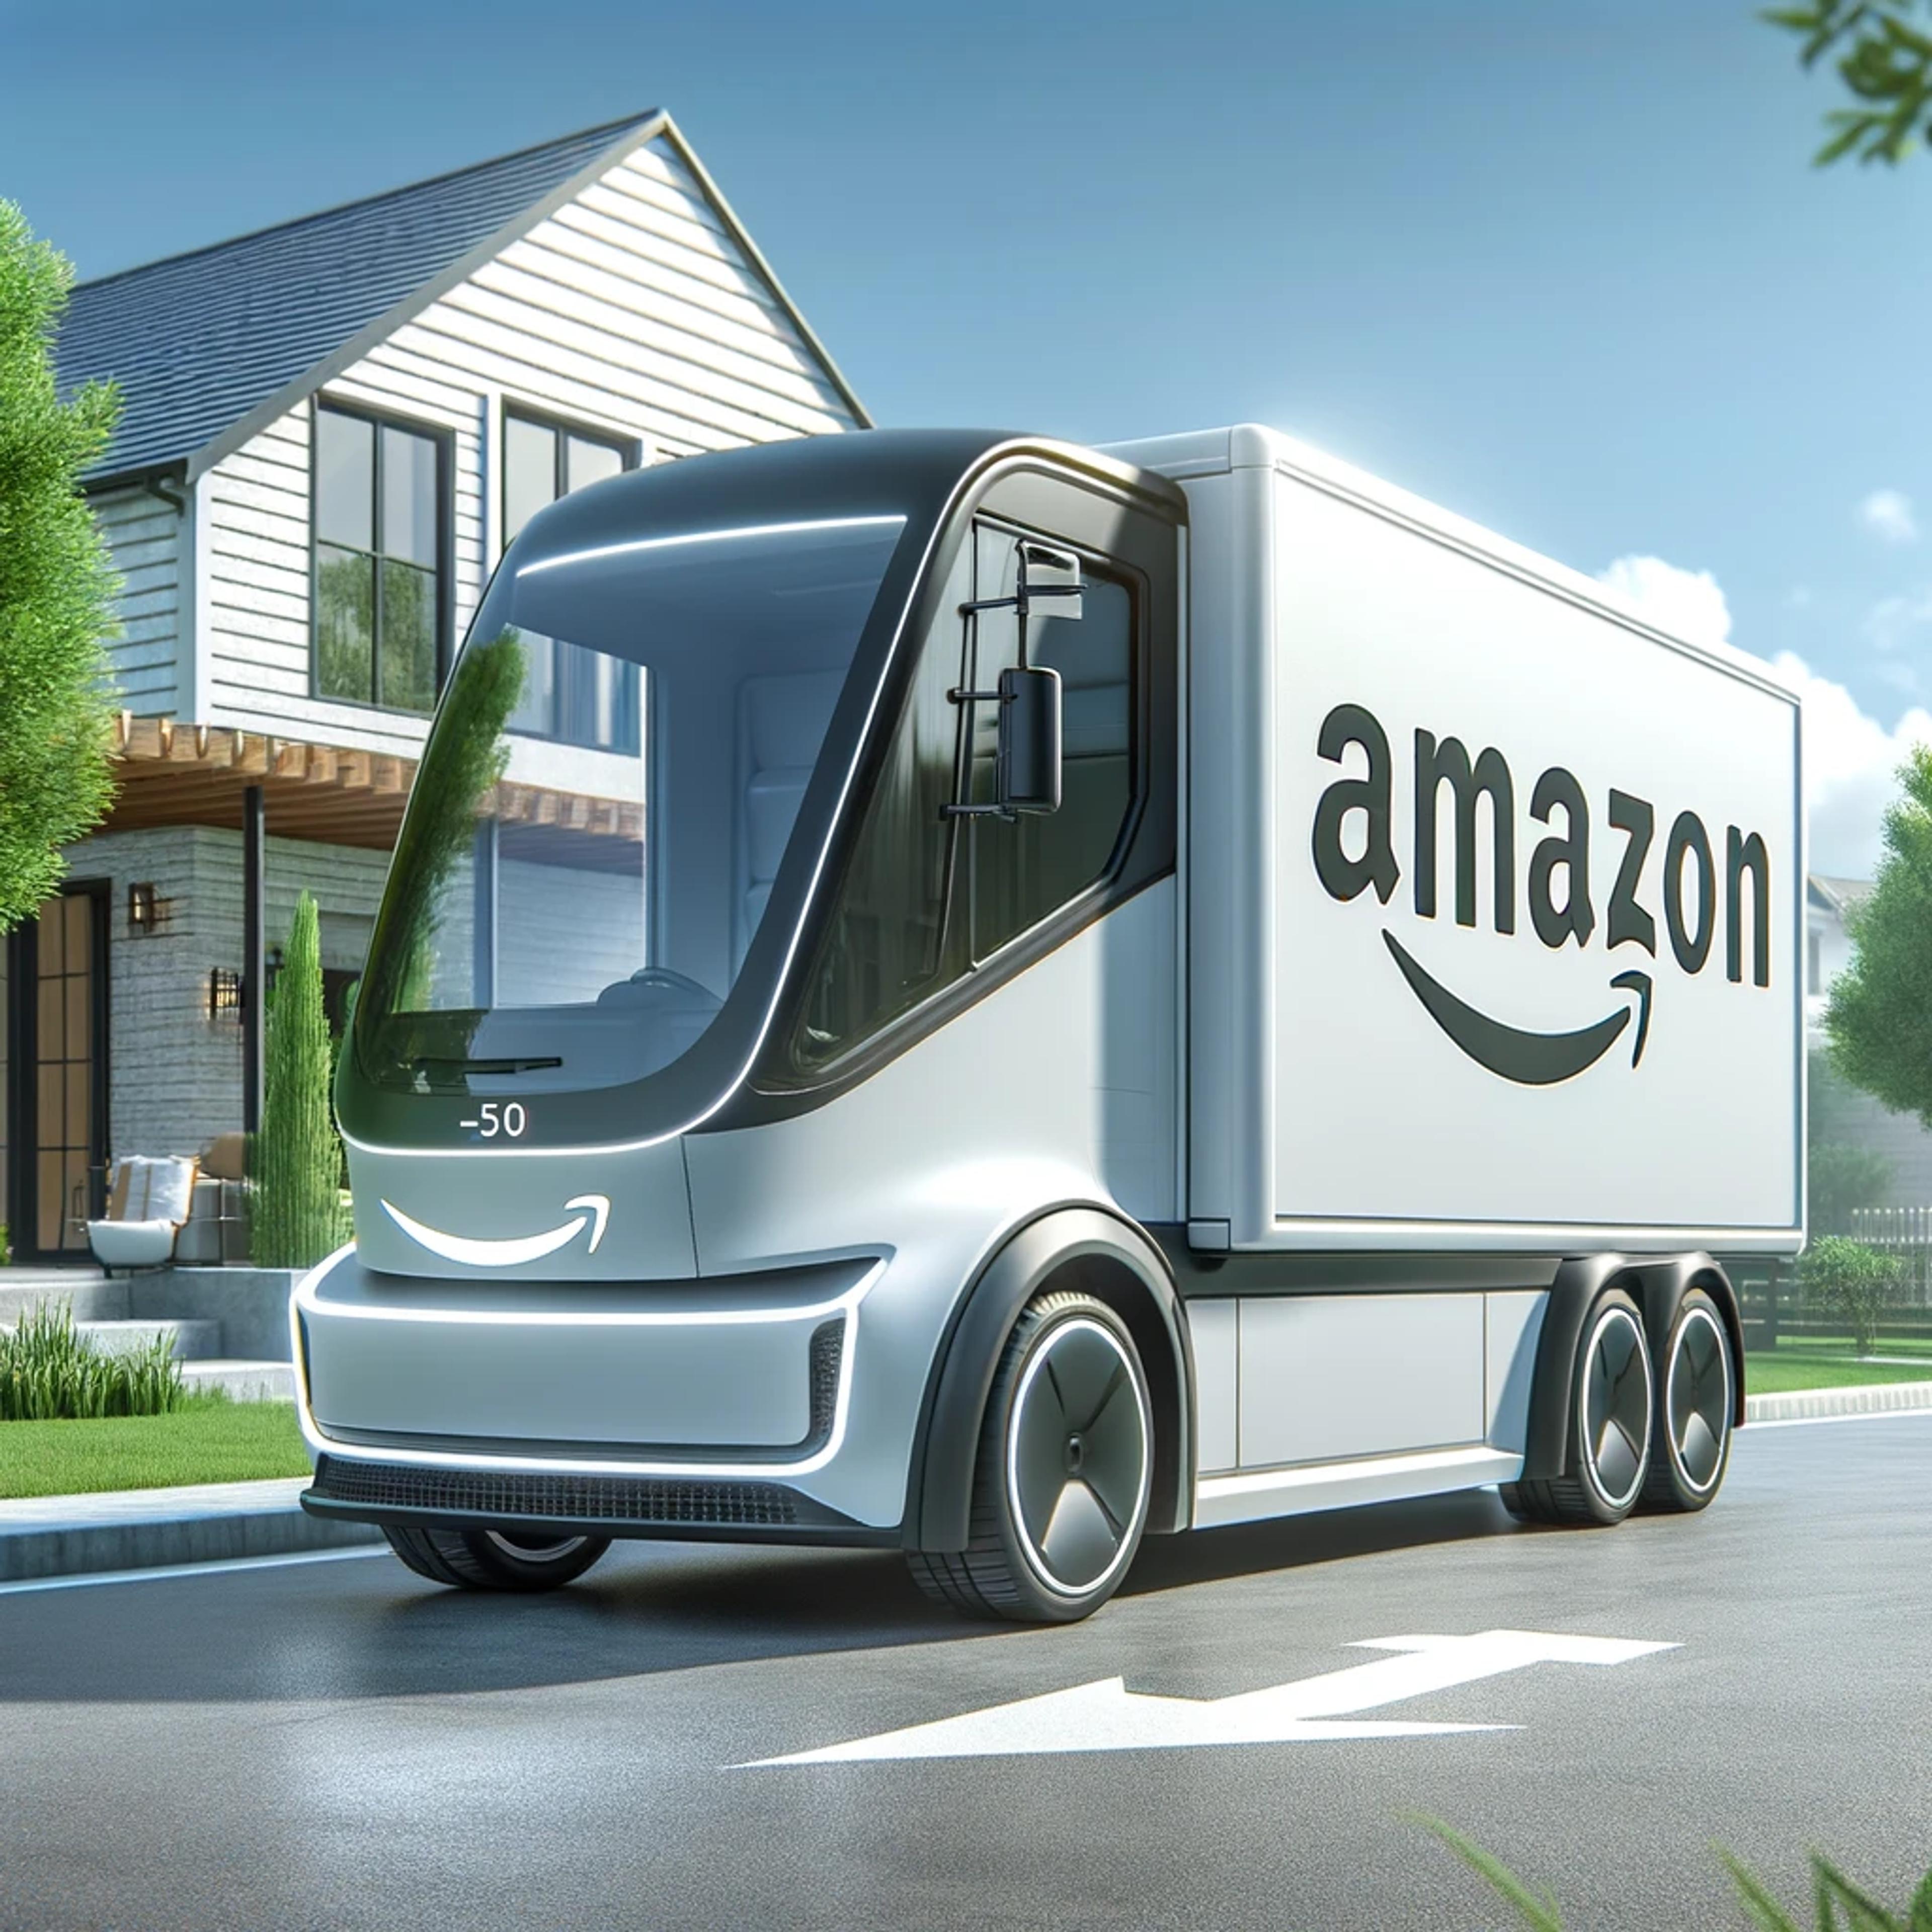 A digital visualization of an eco-friendly Amazon delivery truck, highlighting sustainability in delivery services.